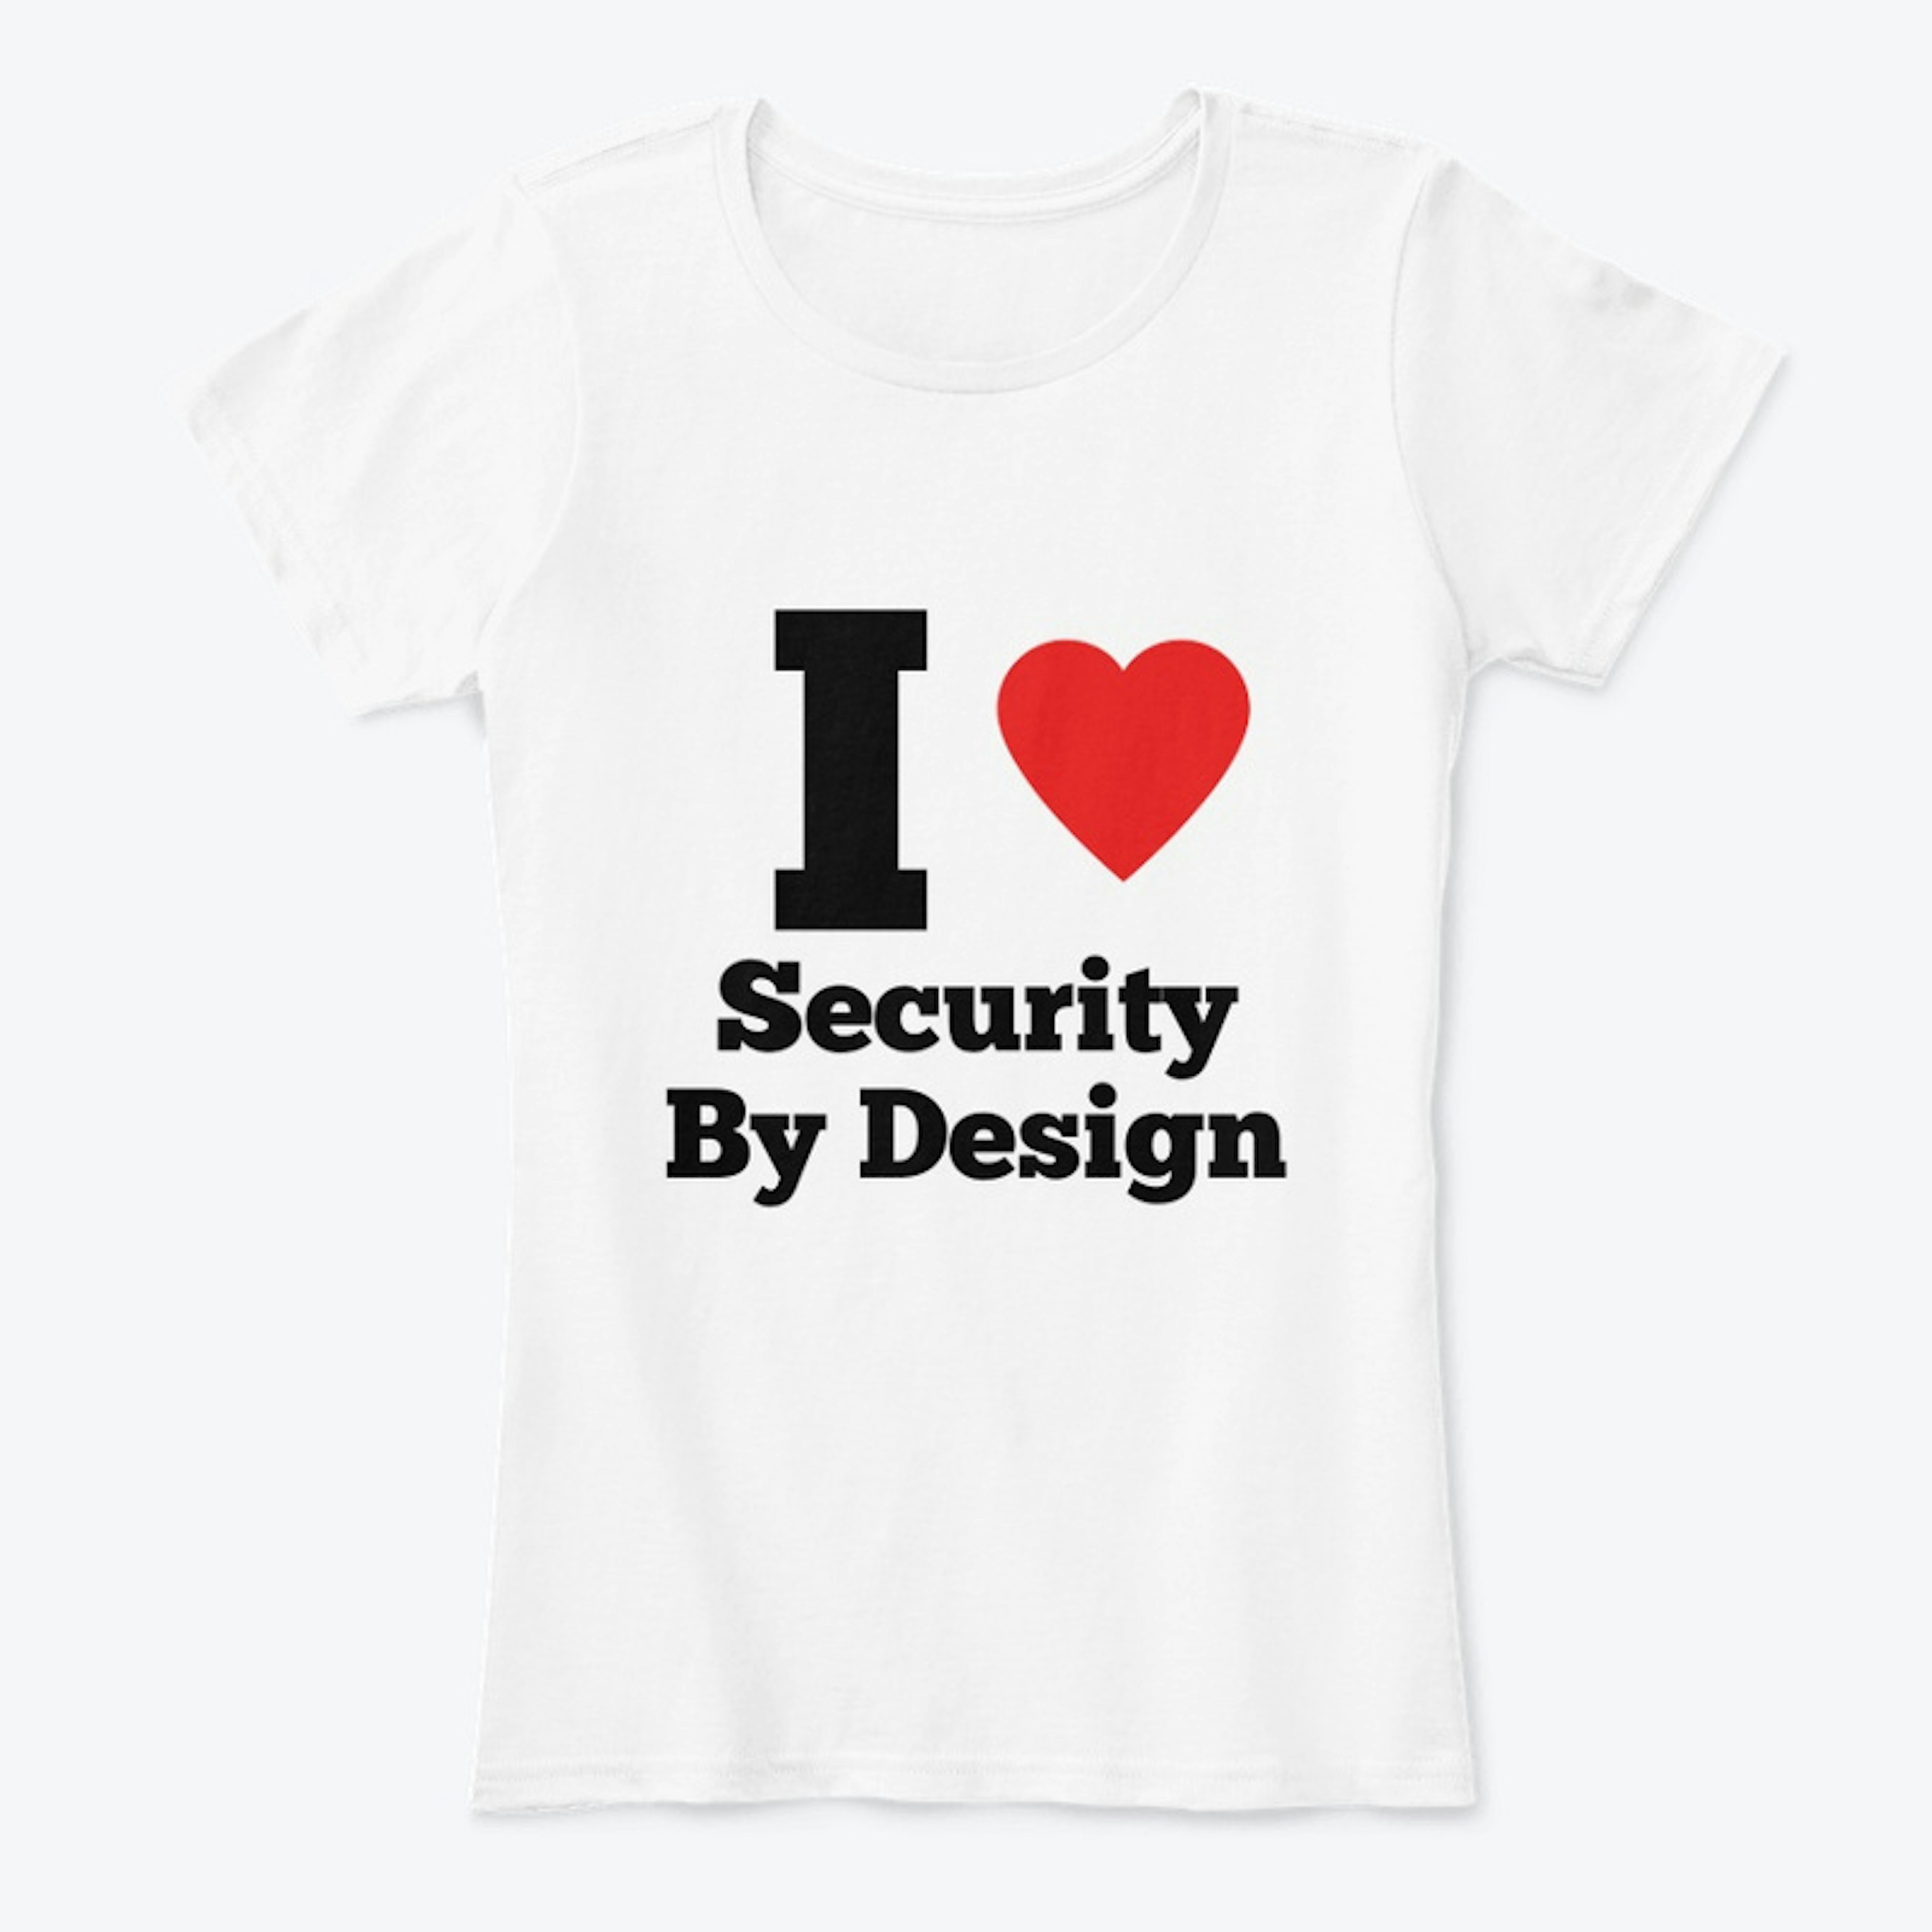 I Heart Security by Design